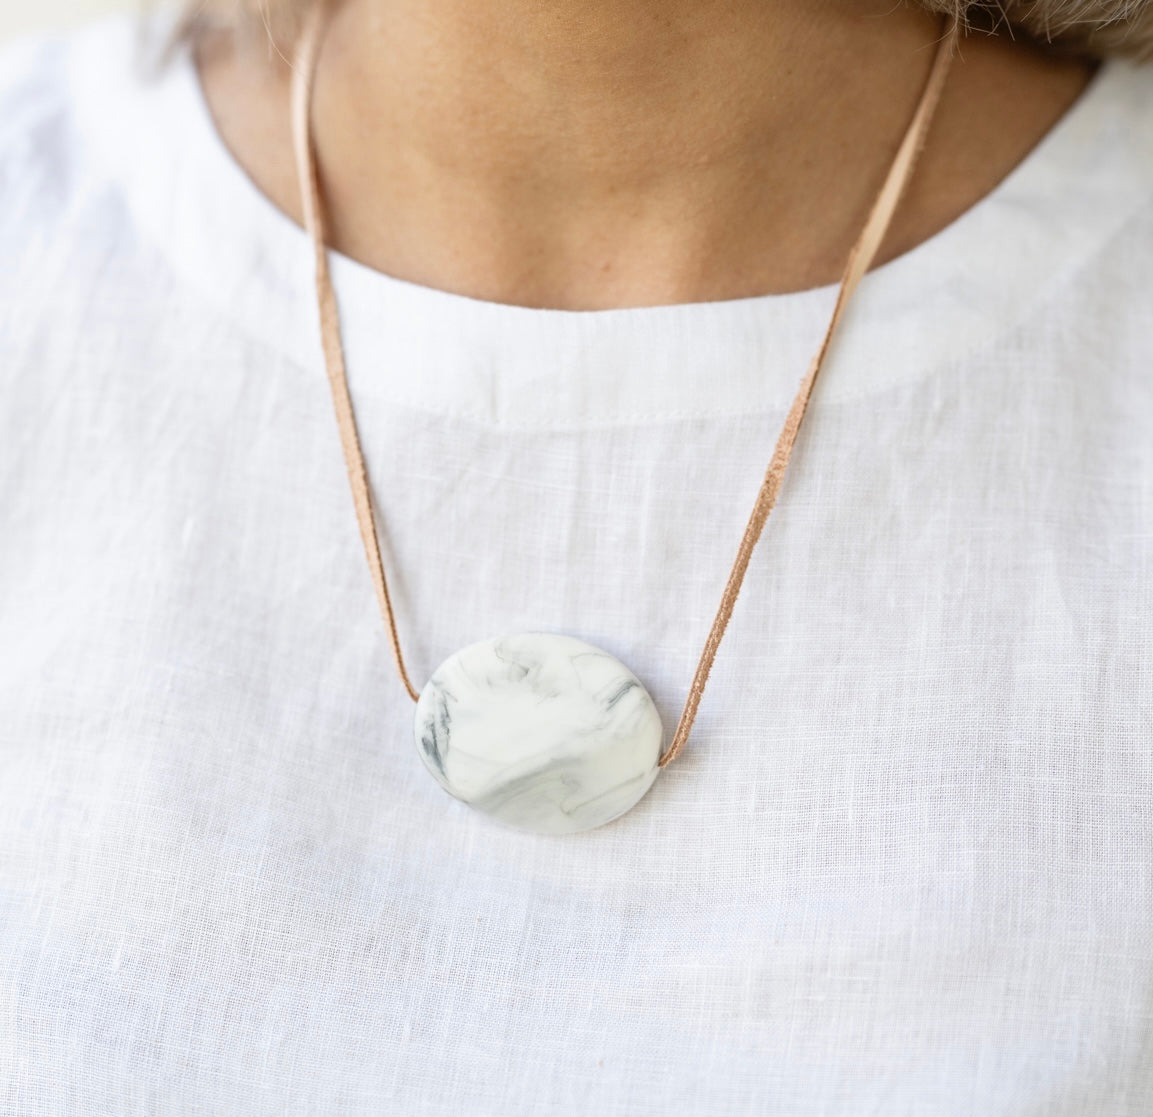 Pebbles Resin and Leather Necklace - White Marble